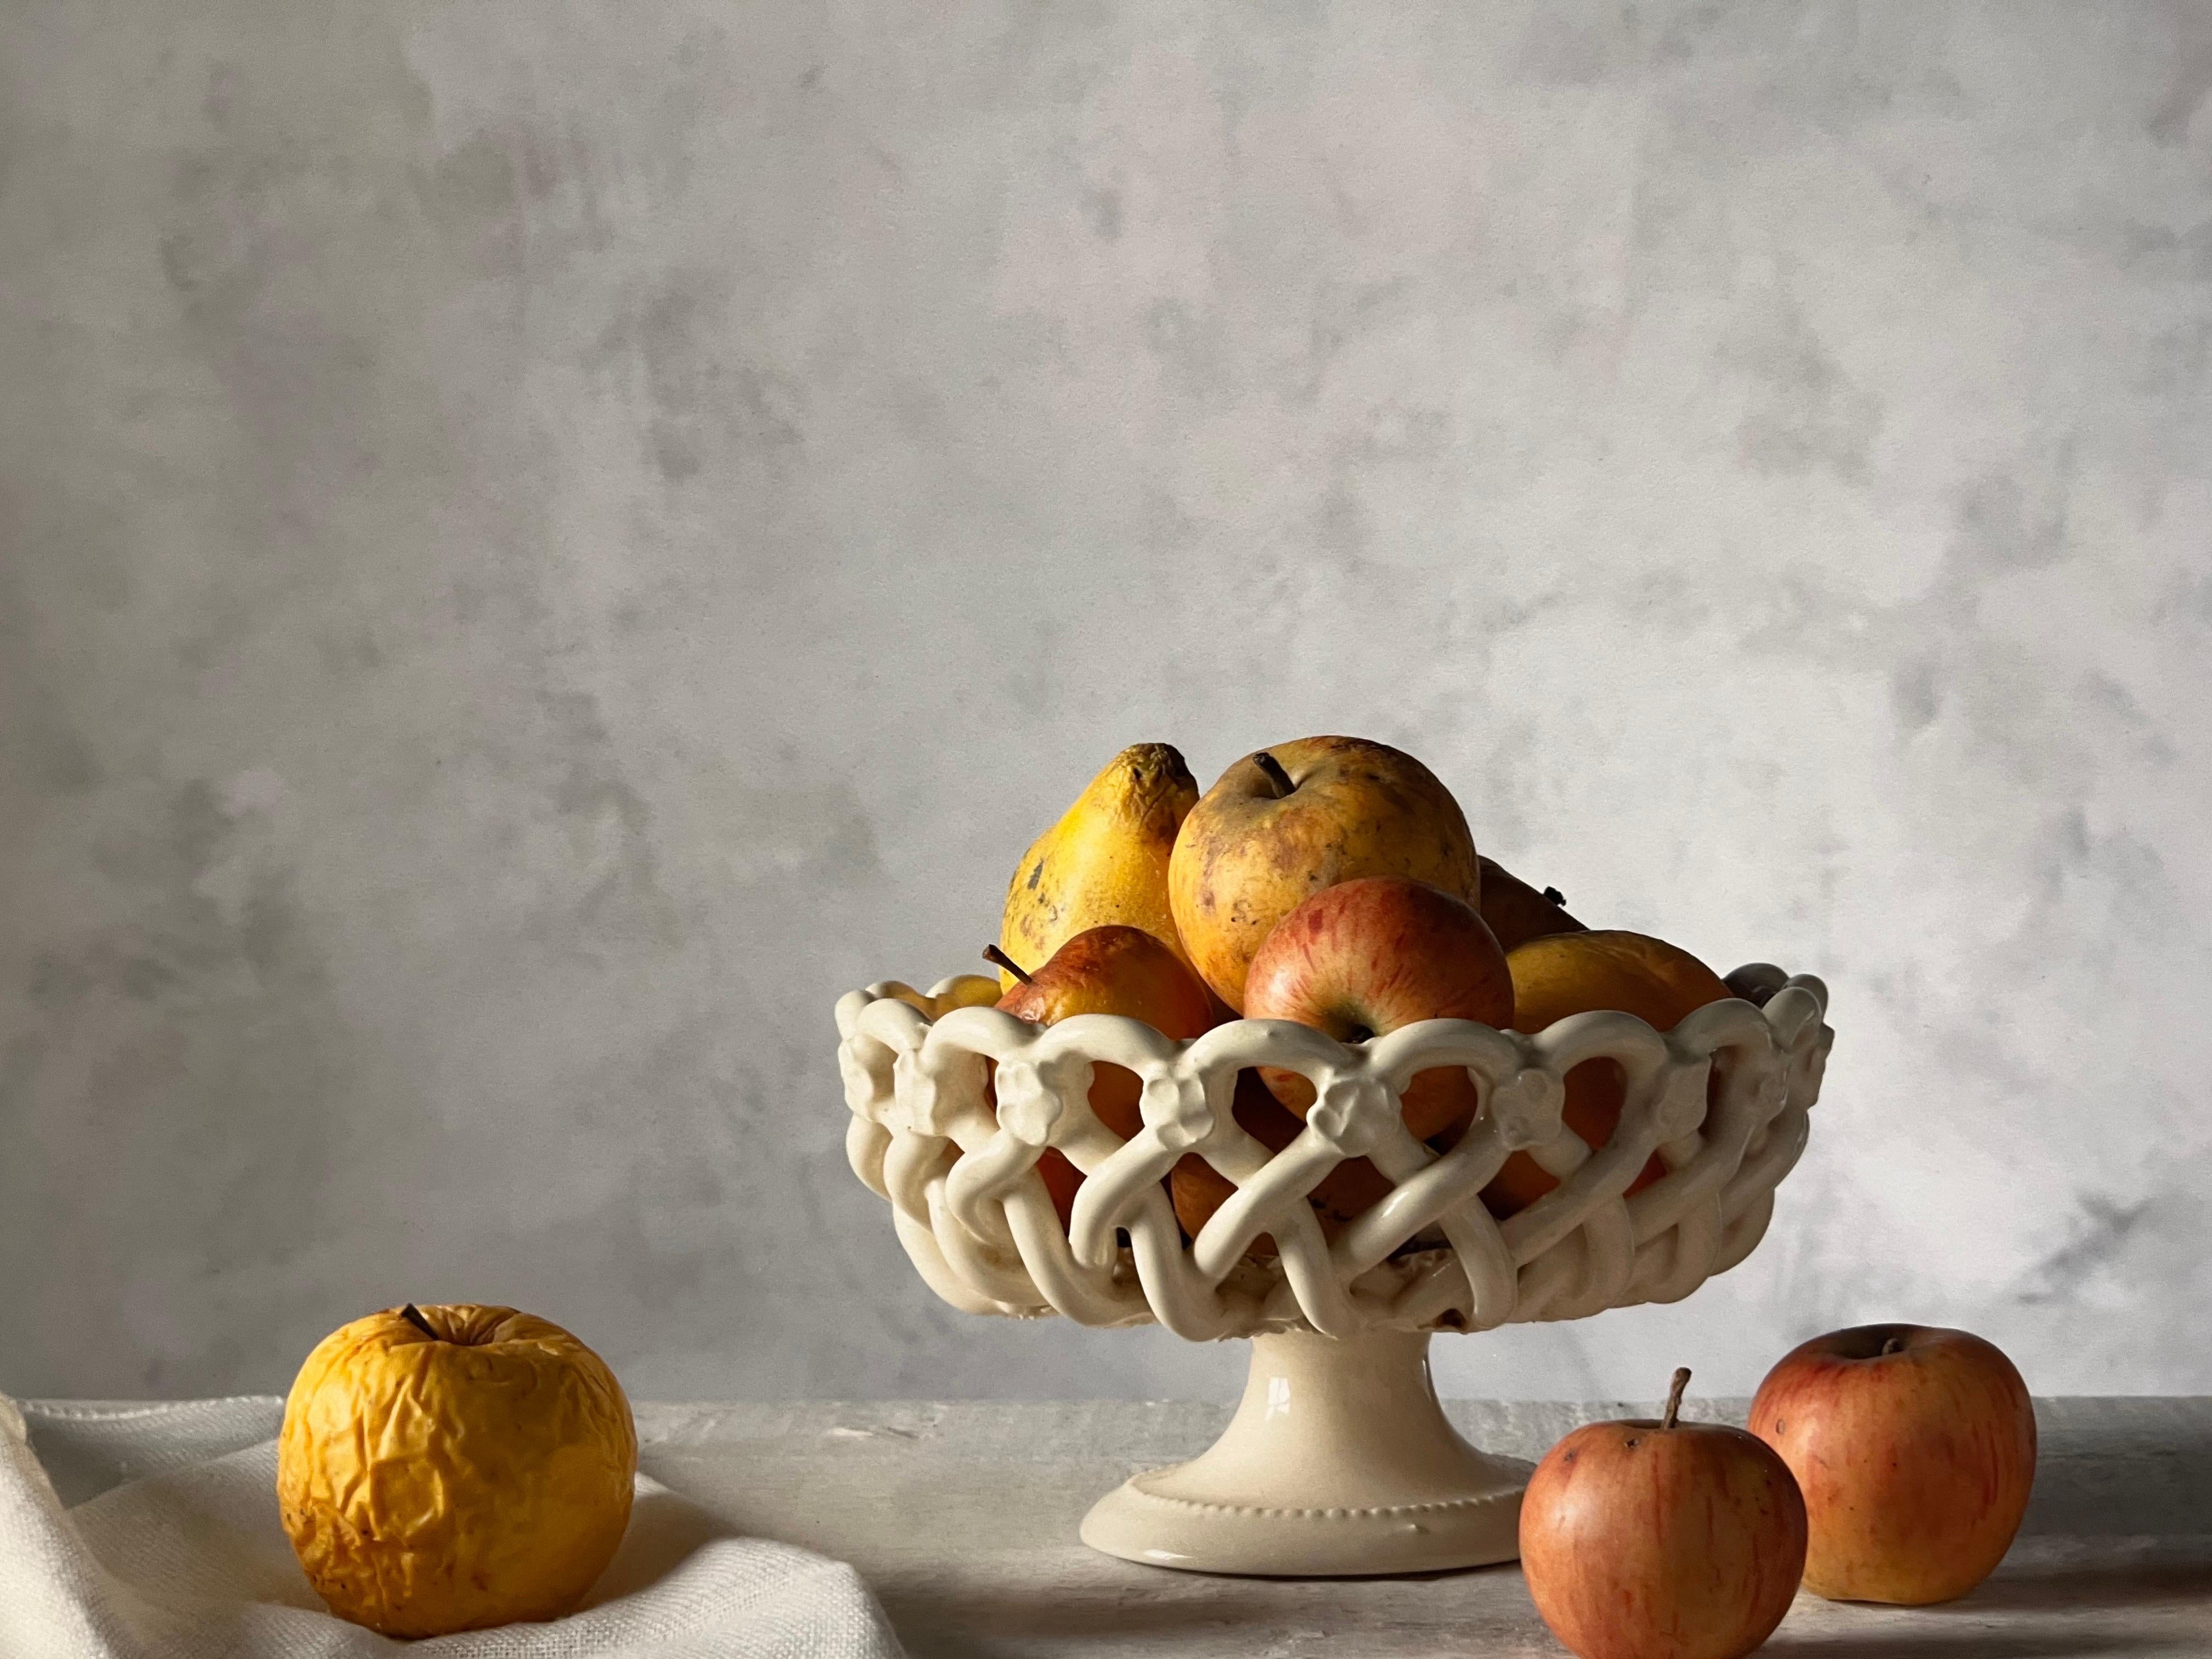 We discovered Carol's mesmerizing work in Paris - and it took us about one second to decide we had to have her work here at Huff Harrington.  Her stunning, lush and succulent still life photography looks like it was plucked from the 15th century and